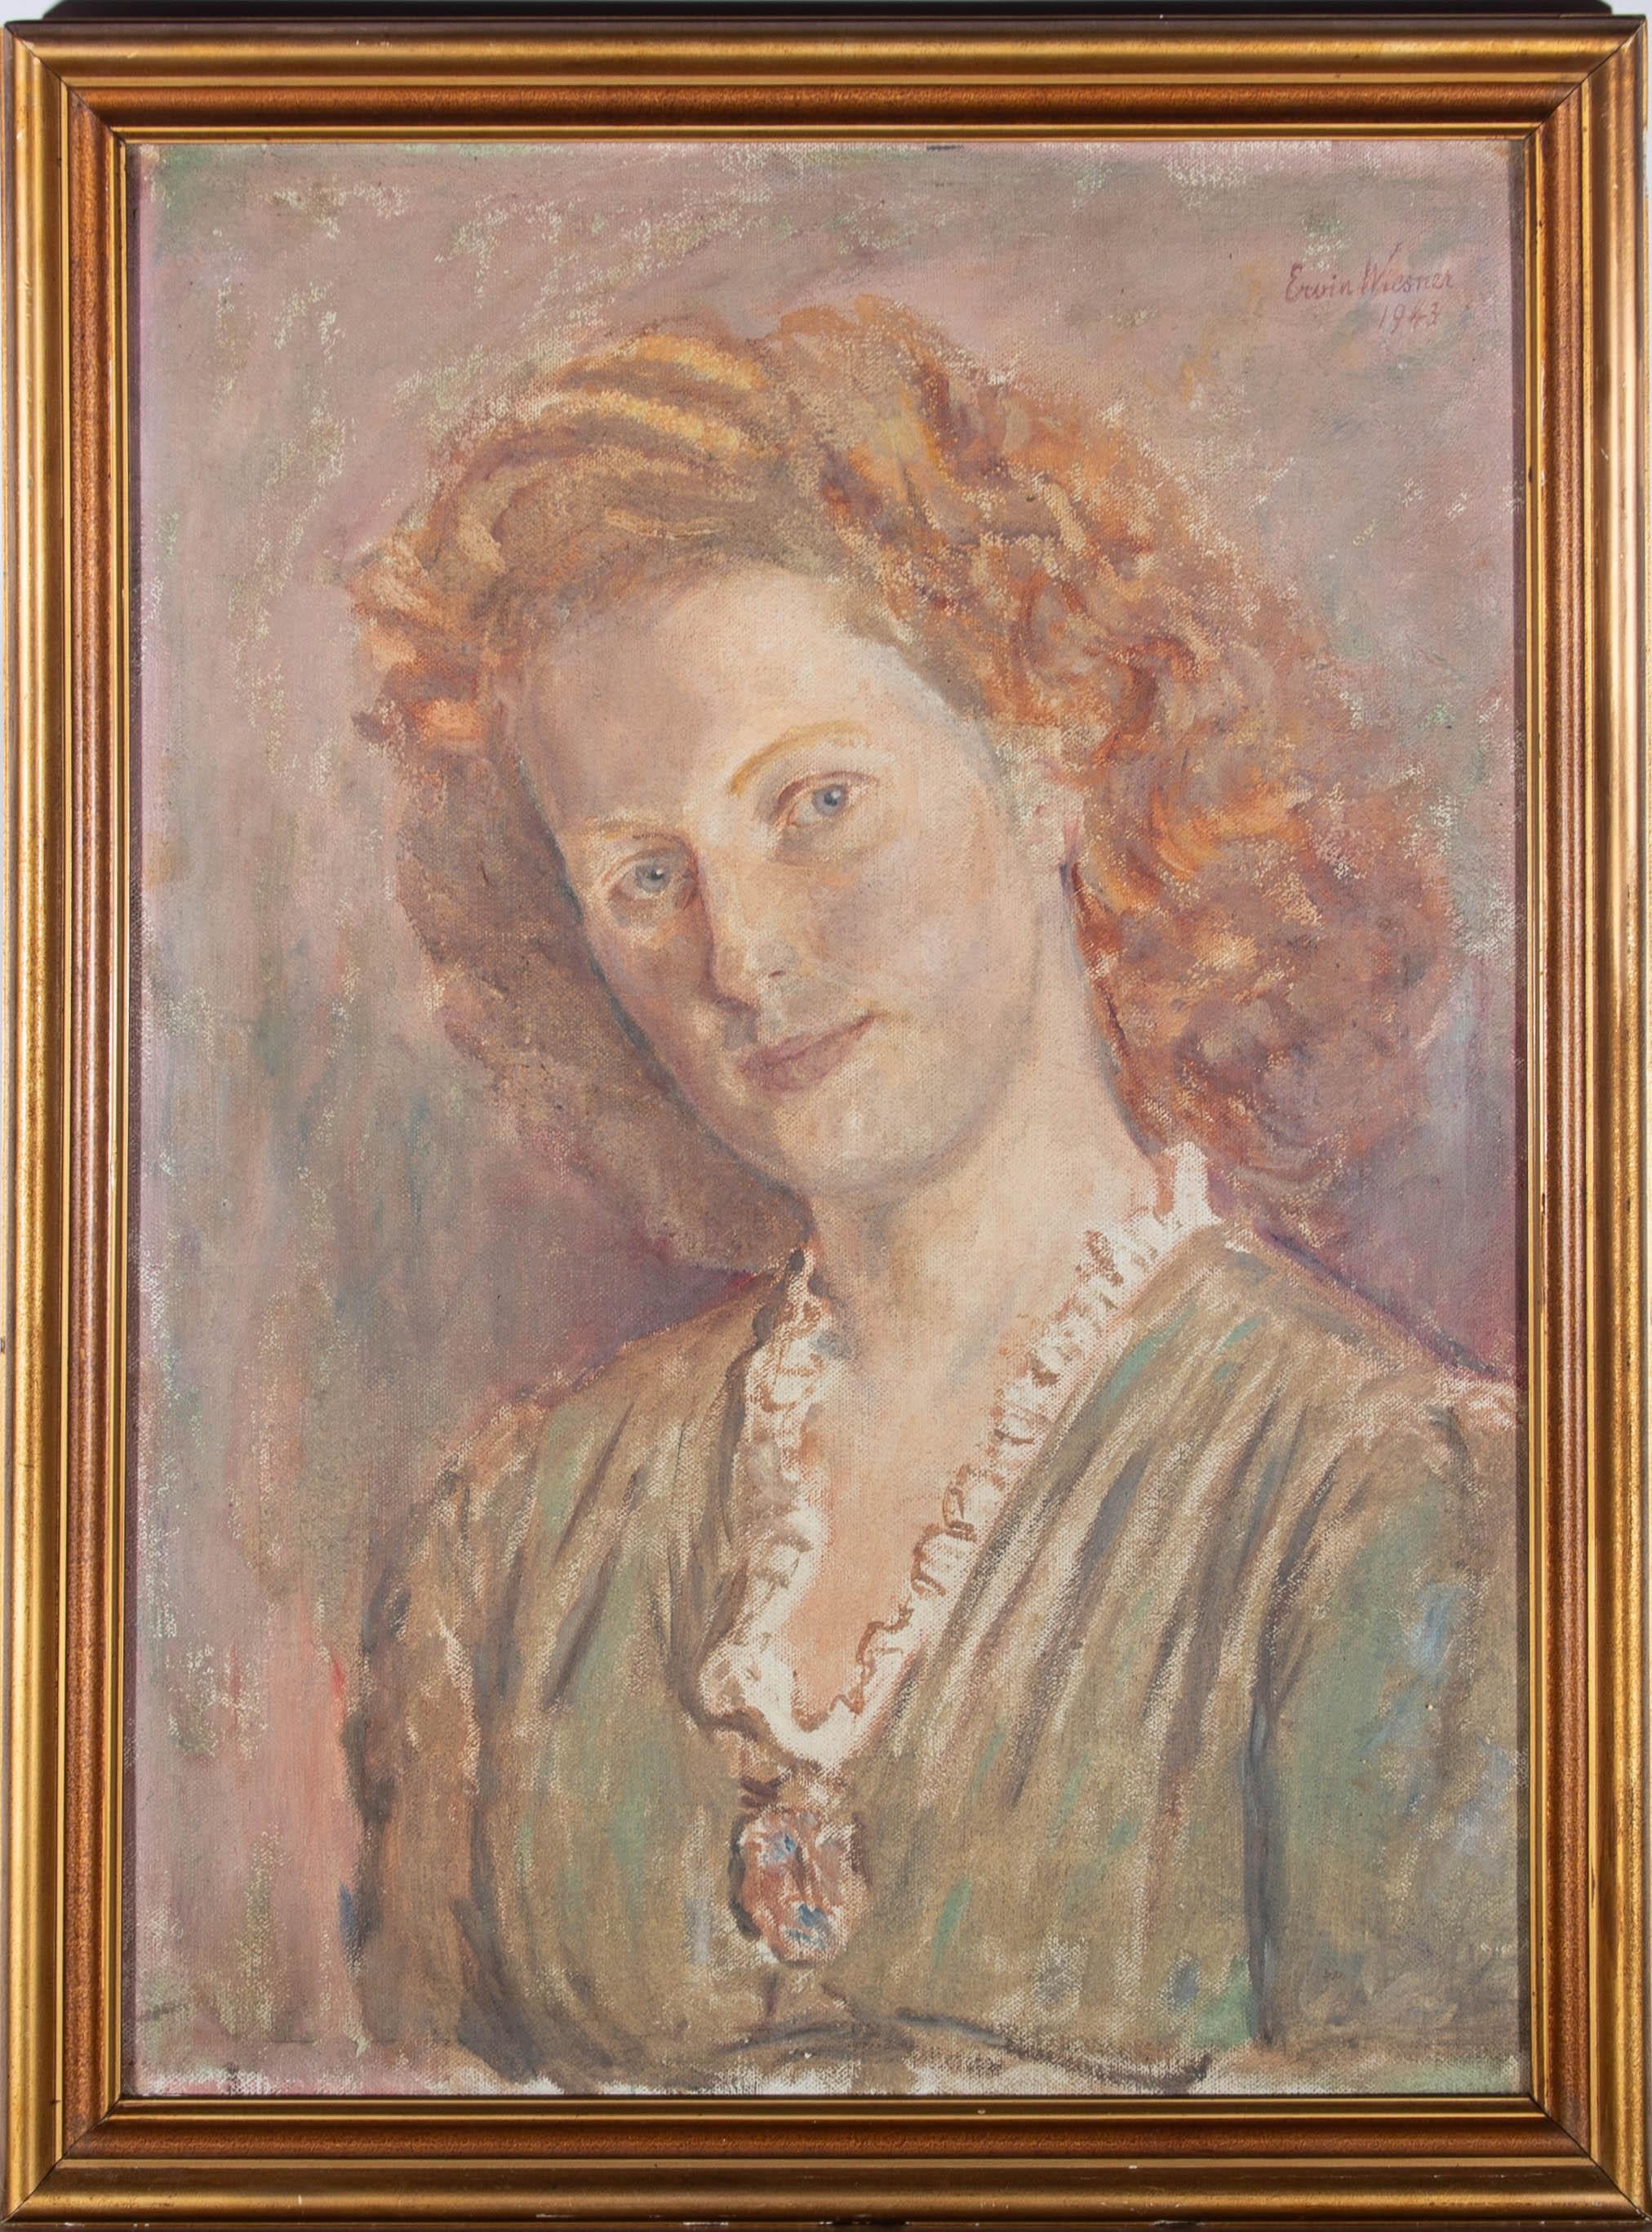 A wonderful mid century portrait of a beautiful young woman with red hair. Painted in a muted colour palette the artist has finely captured her pretty face. Well presented in a gilt effect frame. 1948 Royal Academy exhibition label to the reverse.